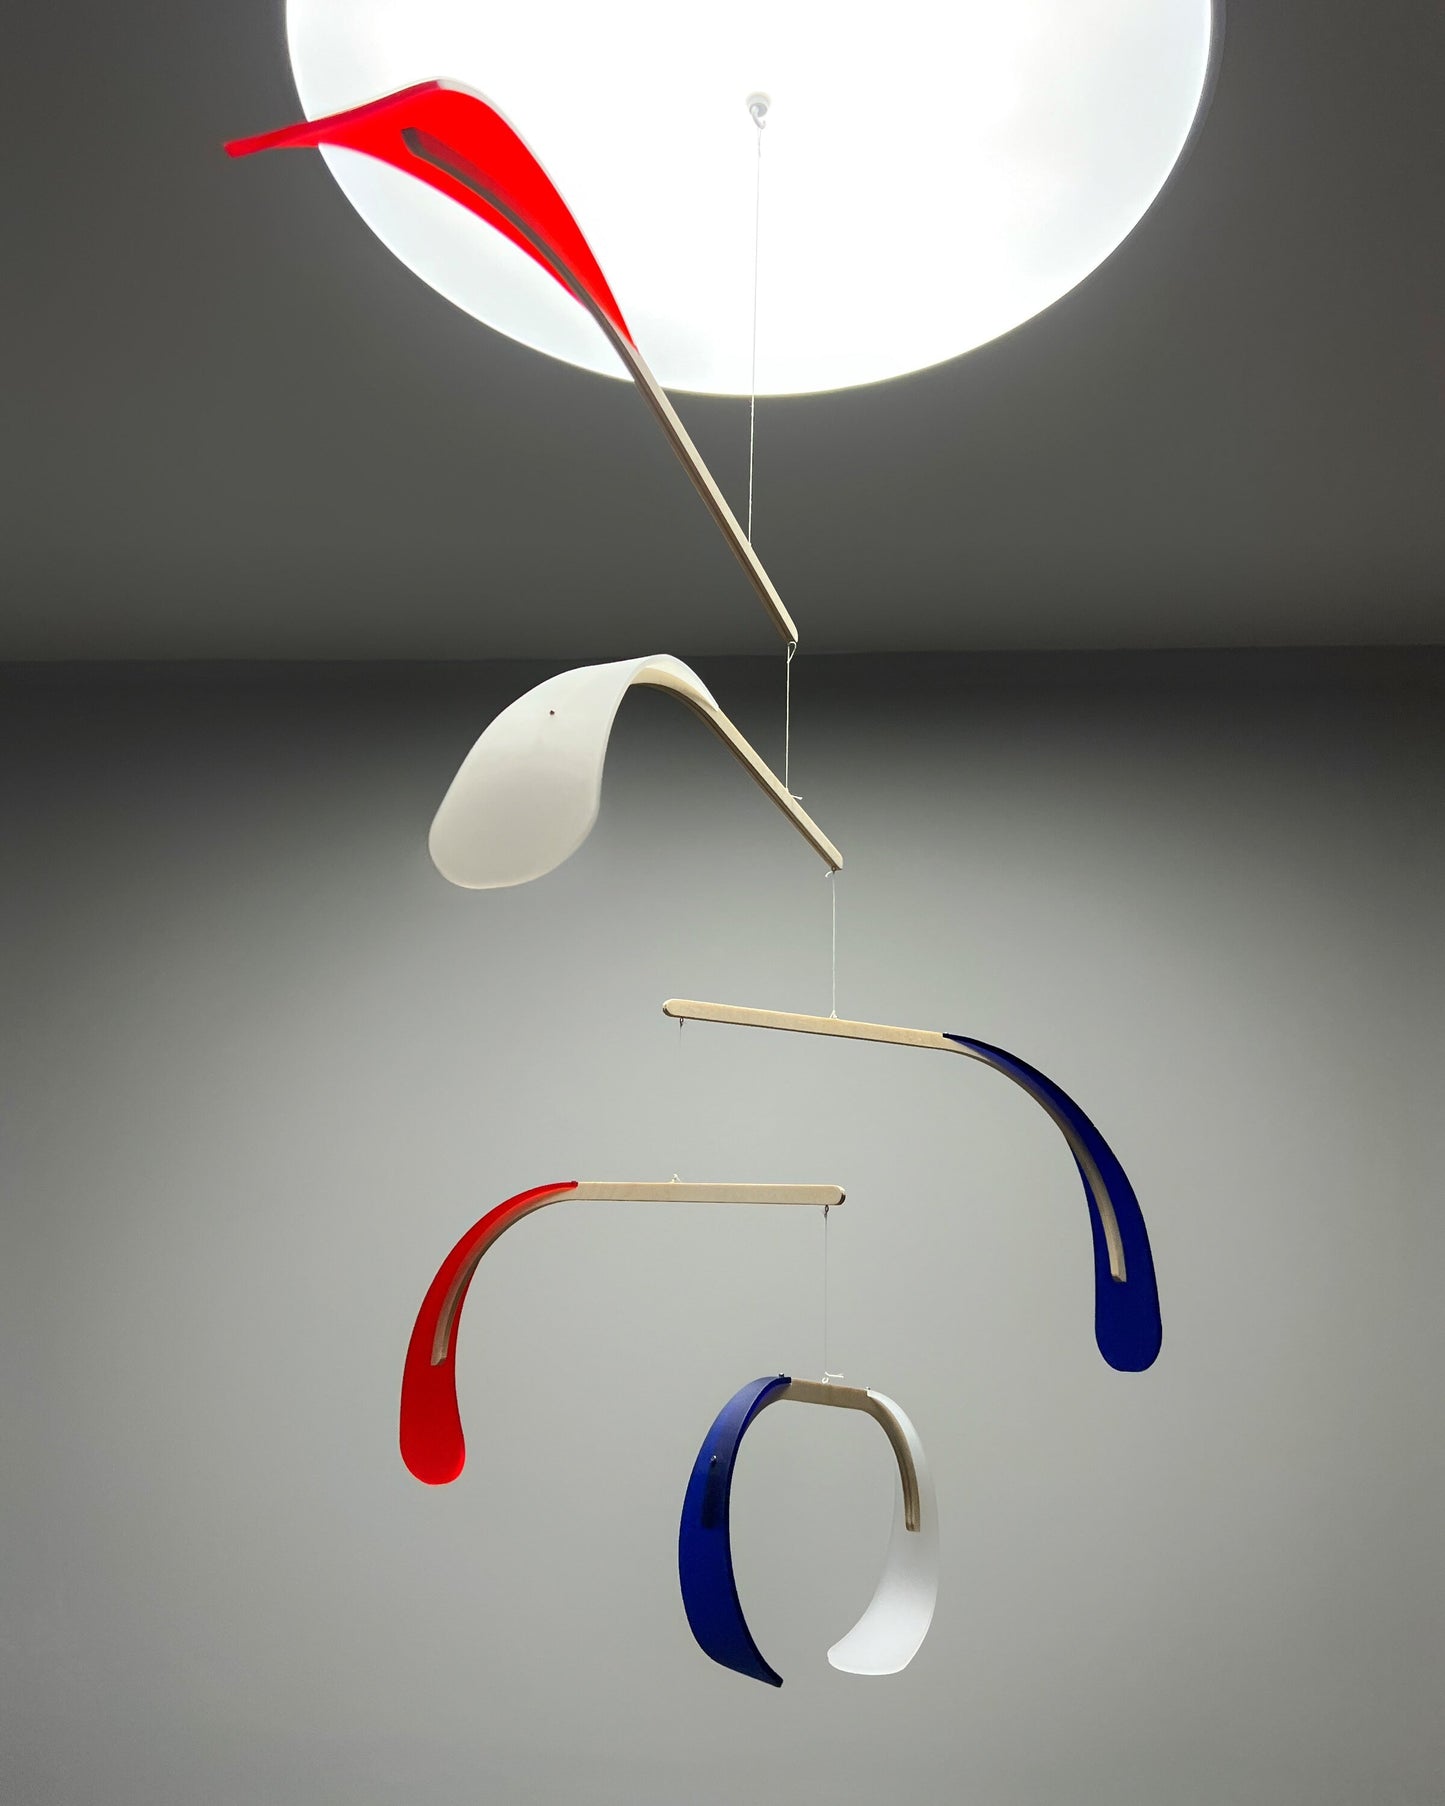 Bloom Mobile - The Illuminist - Mobiles Kinetic Mobile Kinetic Art  Kinetic Sculpture Crib Mobile Baby Mobile Nursery Mobile Mobile Art Mid Century Art  Mid Century modern Calder mobile mobiles for adults furniture and decor Hanging Art Mobile Art spinning mobile Modern Art Contemporary Art  Hanging mobile Calder-inspired